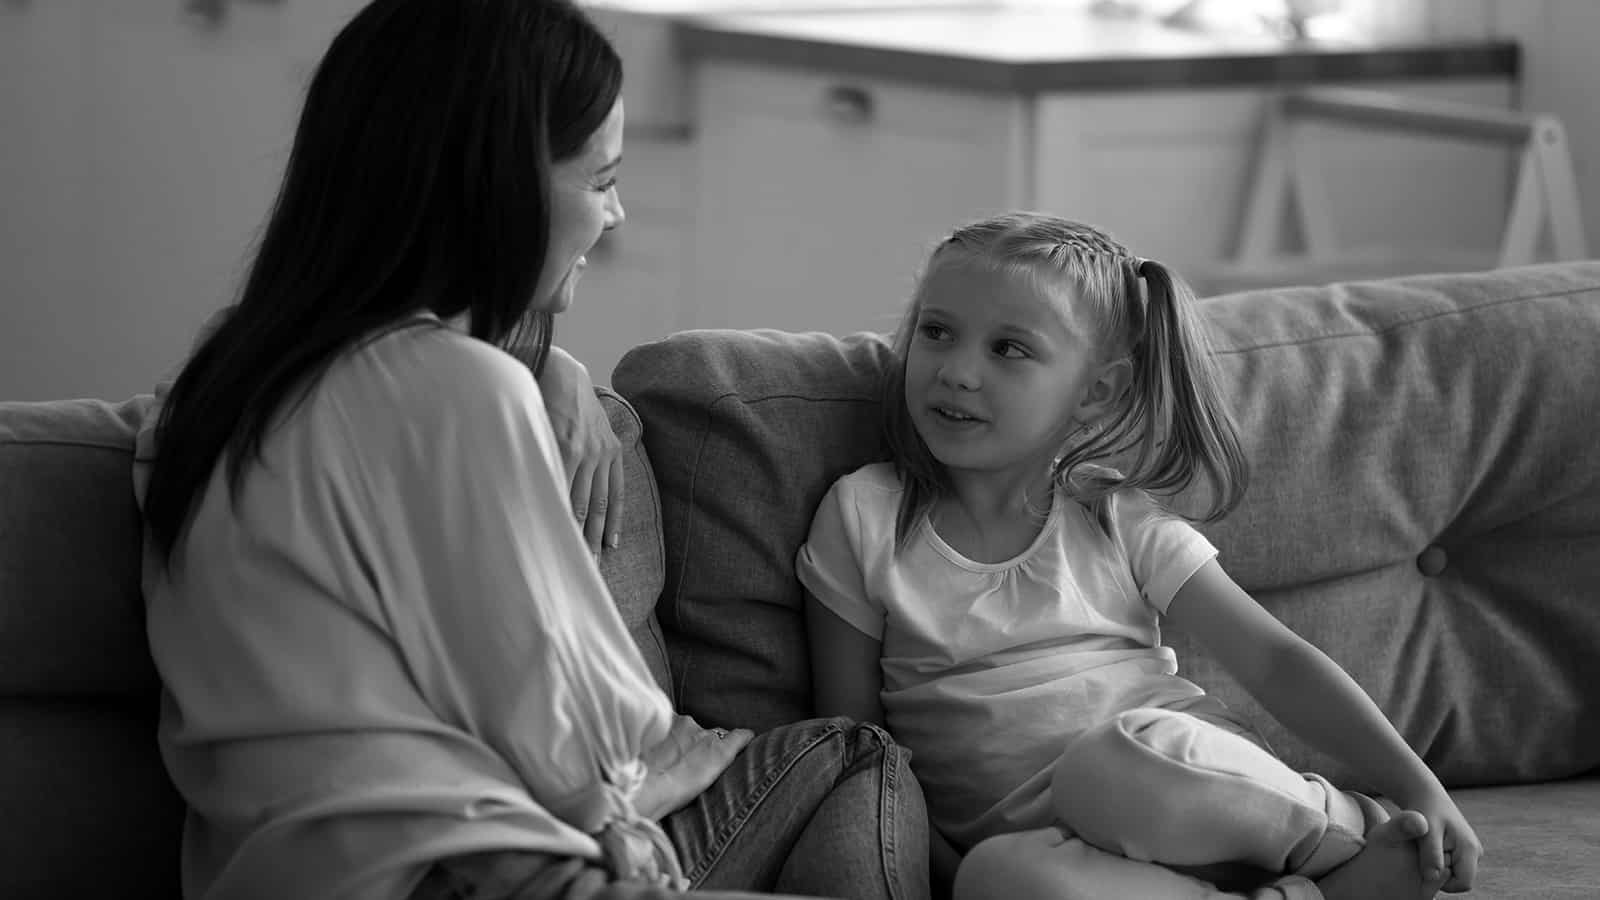 Therapists Explain 5 Ways to Discipline Children Without Hurting Feelings